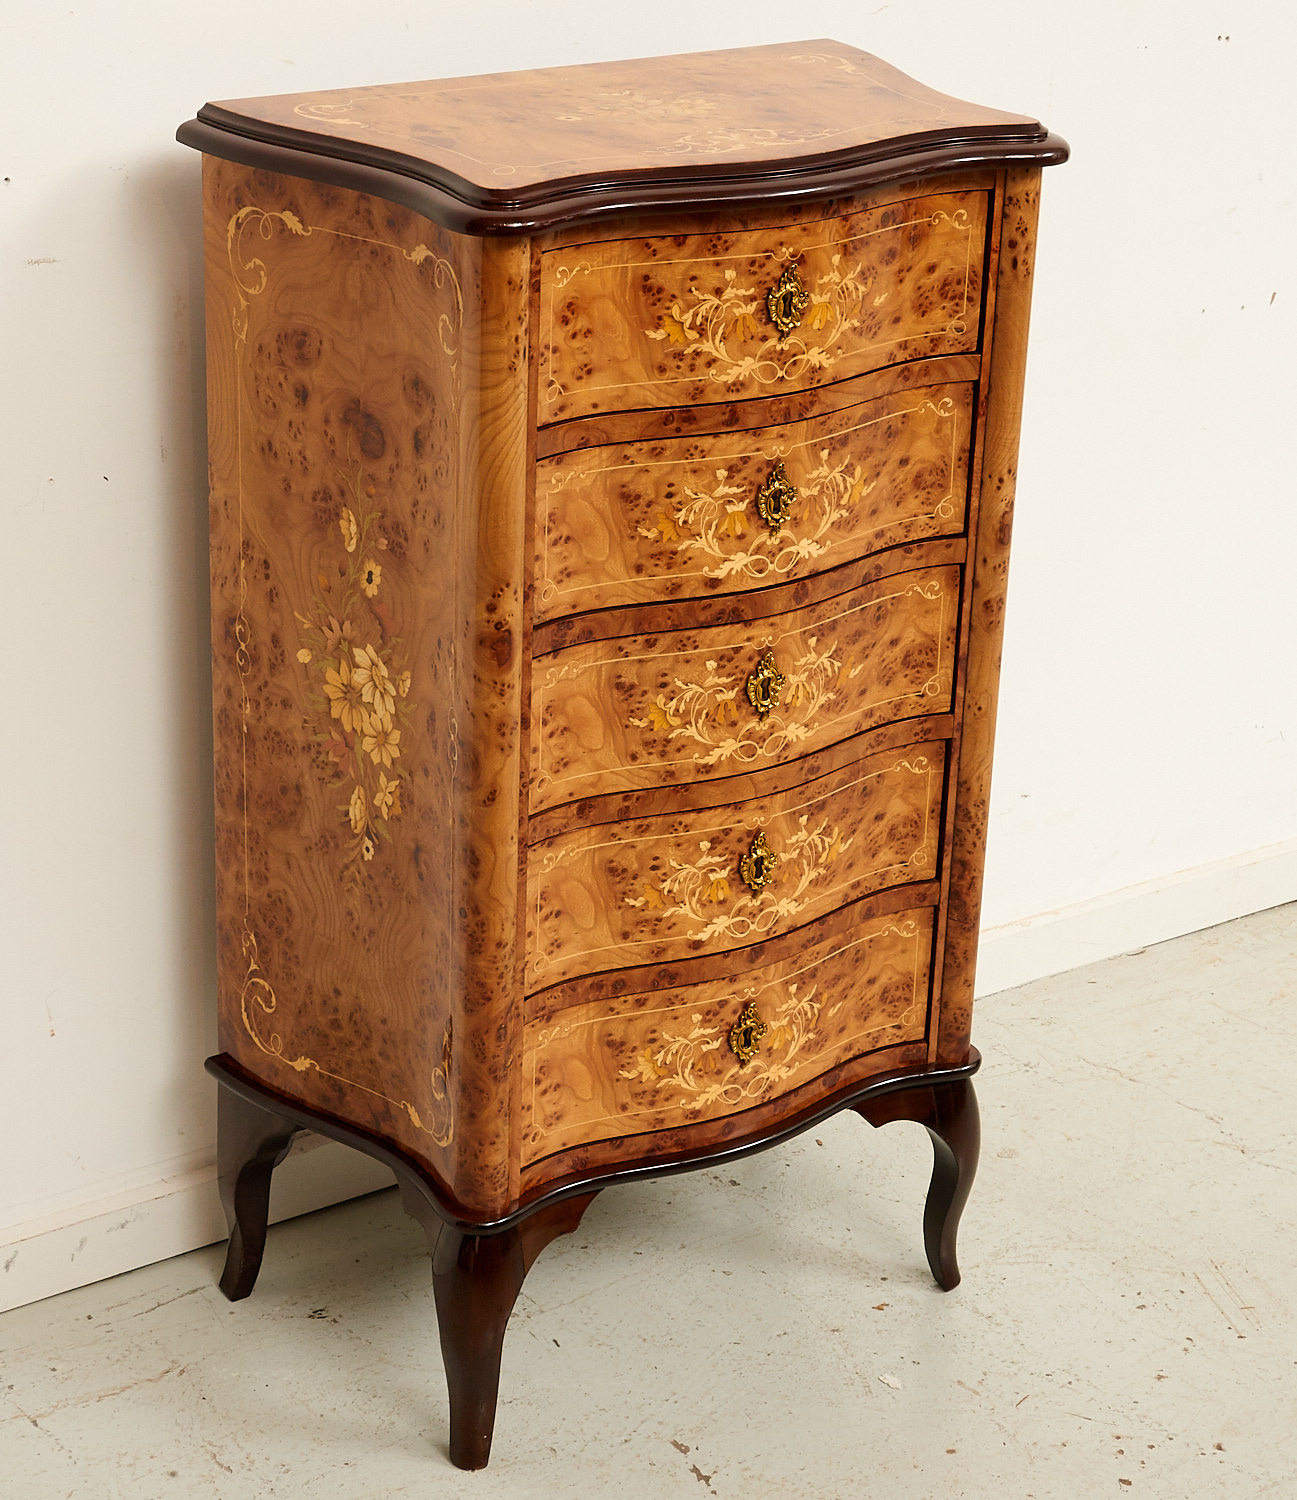 LOUIS XV STYLE MARQUETRY INLAID